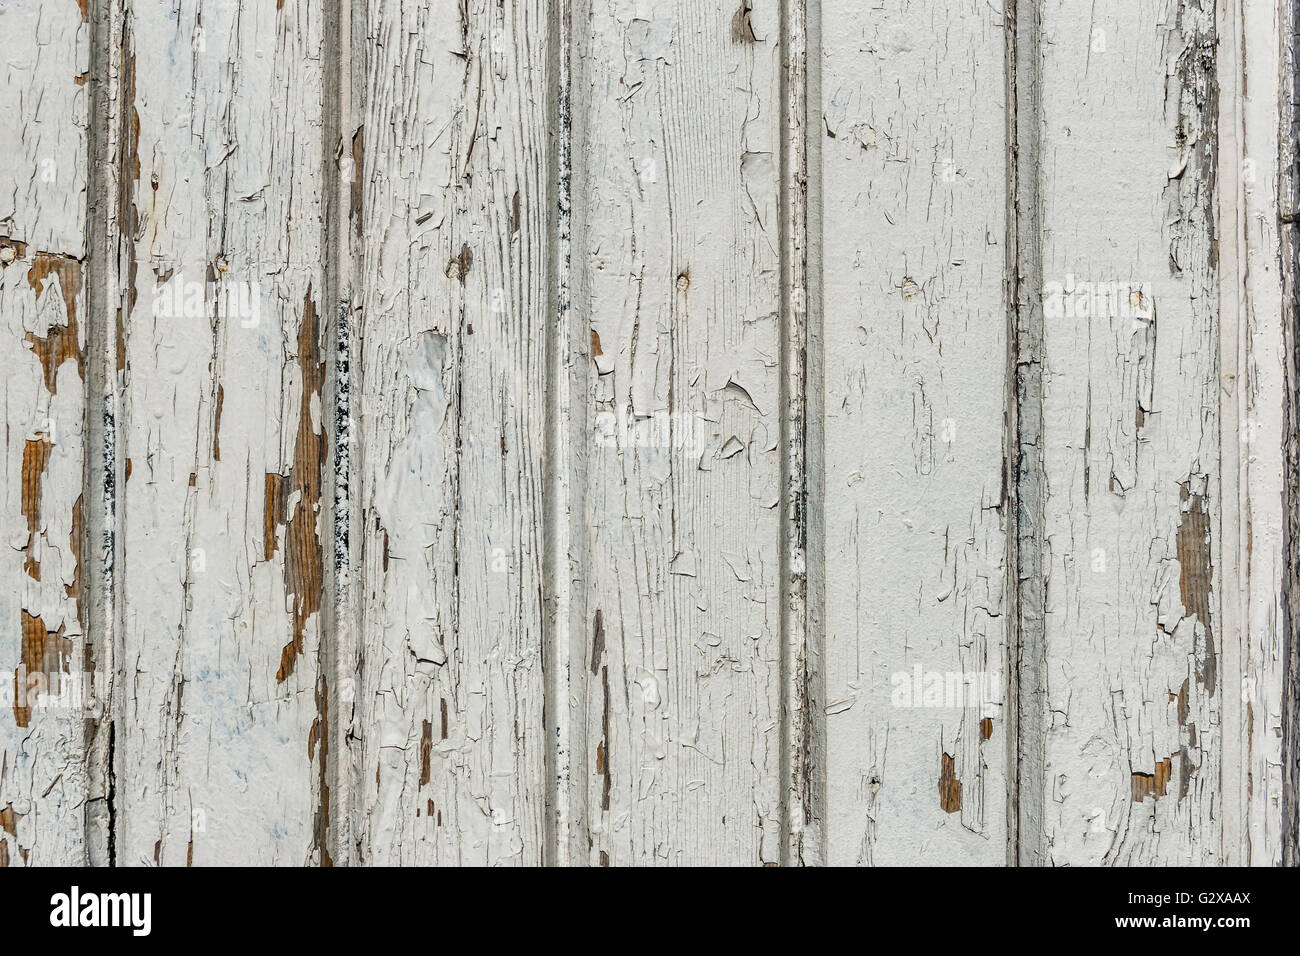 Details of an old gray wooden wall Stock Photo